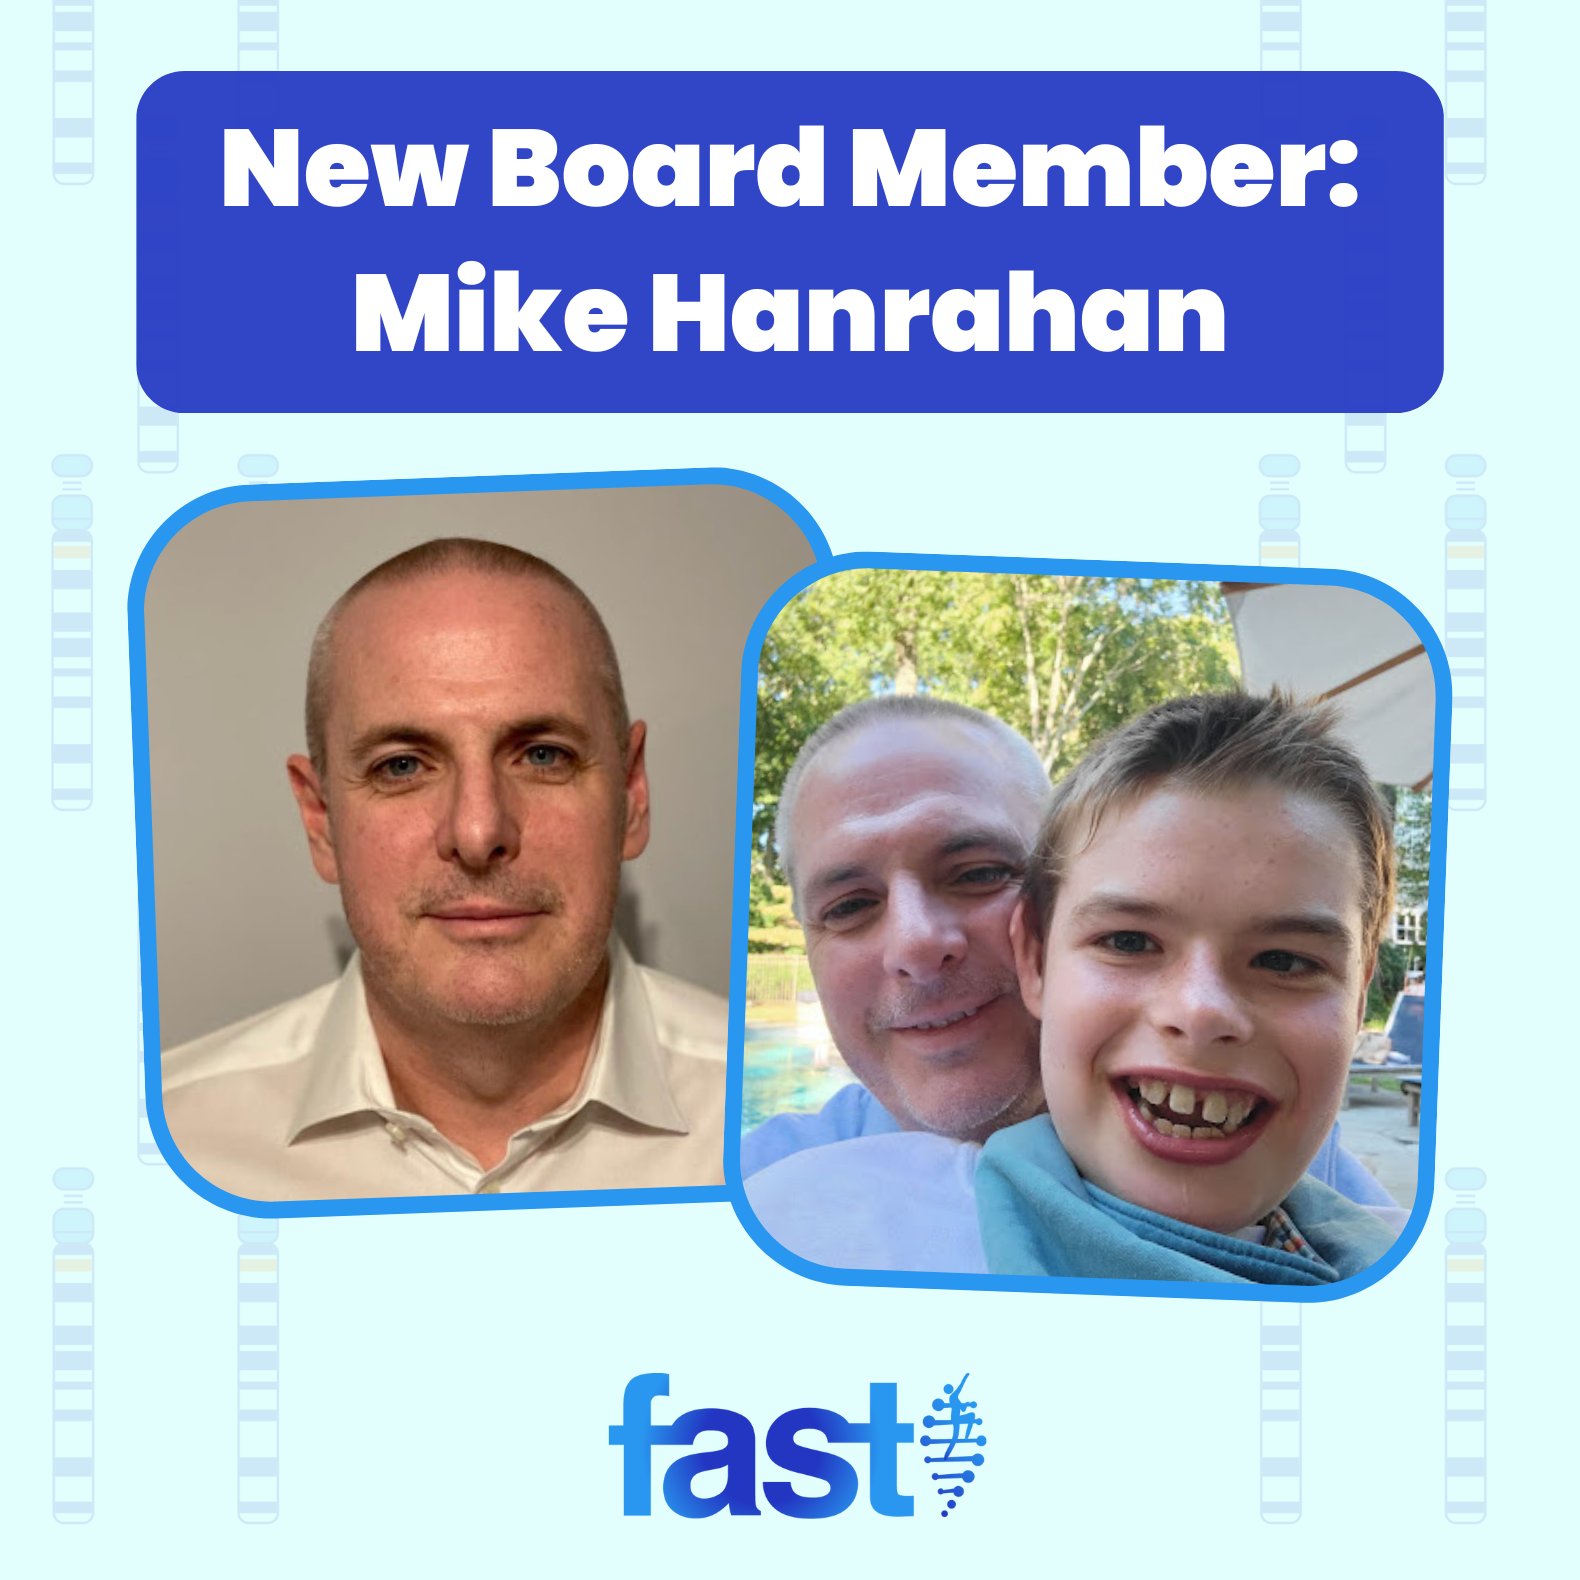 New Board Member: Mike Hanrahan - with photos of Mike and Mike with his son